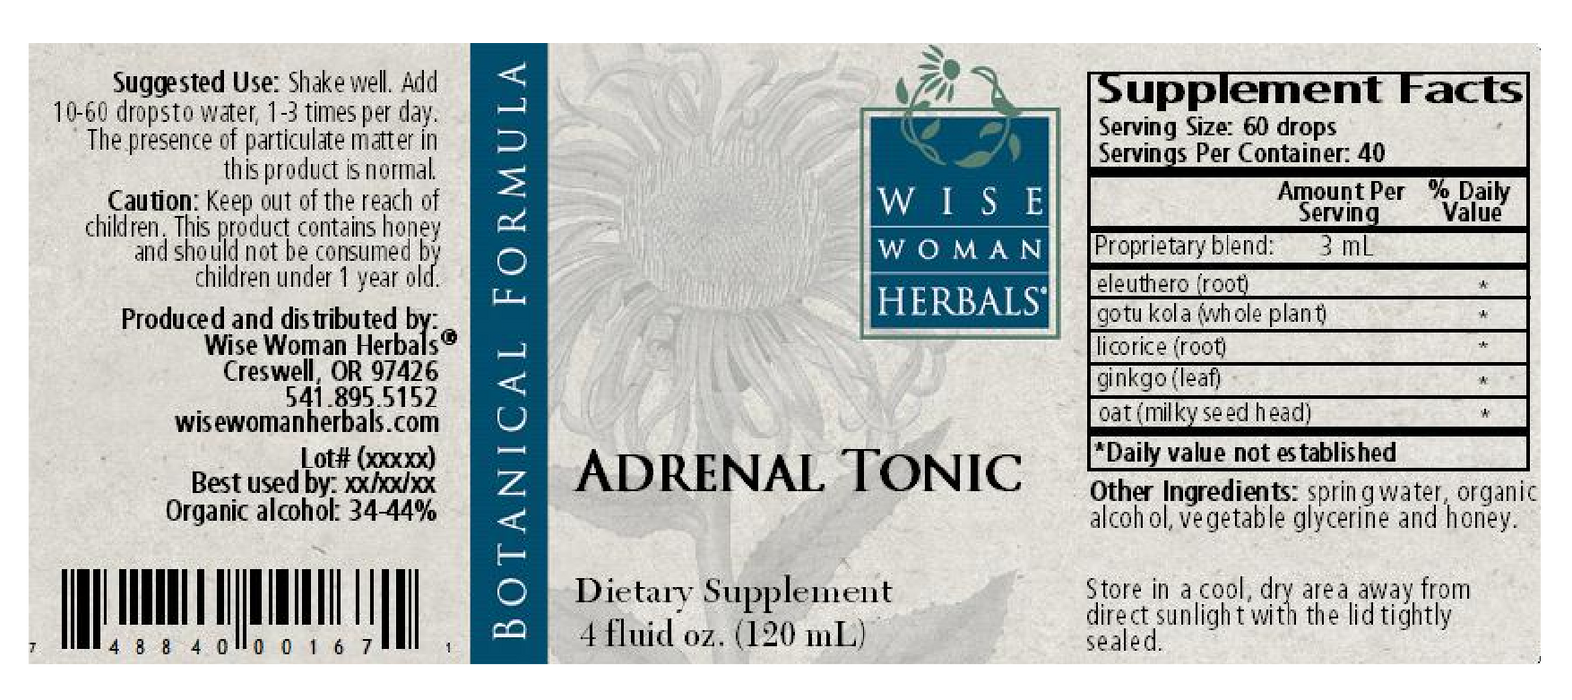 Wise Woman Herbals Adrenal Tonic